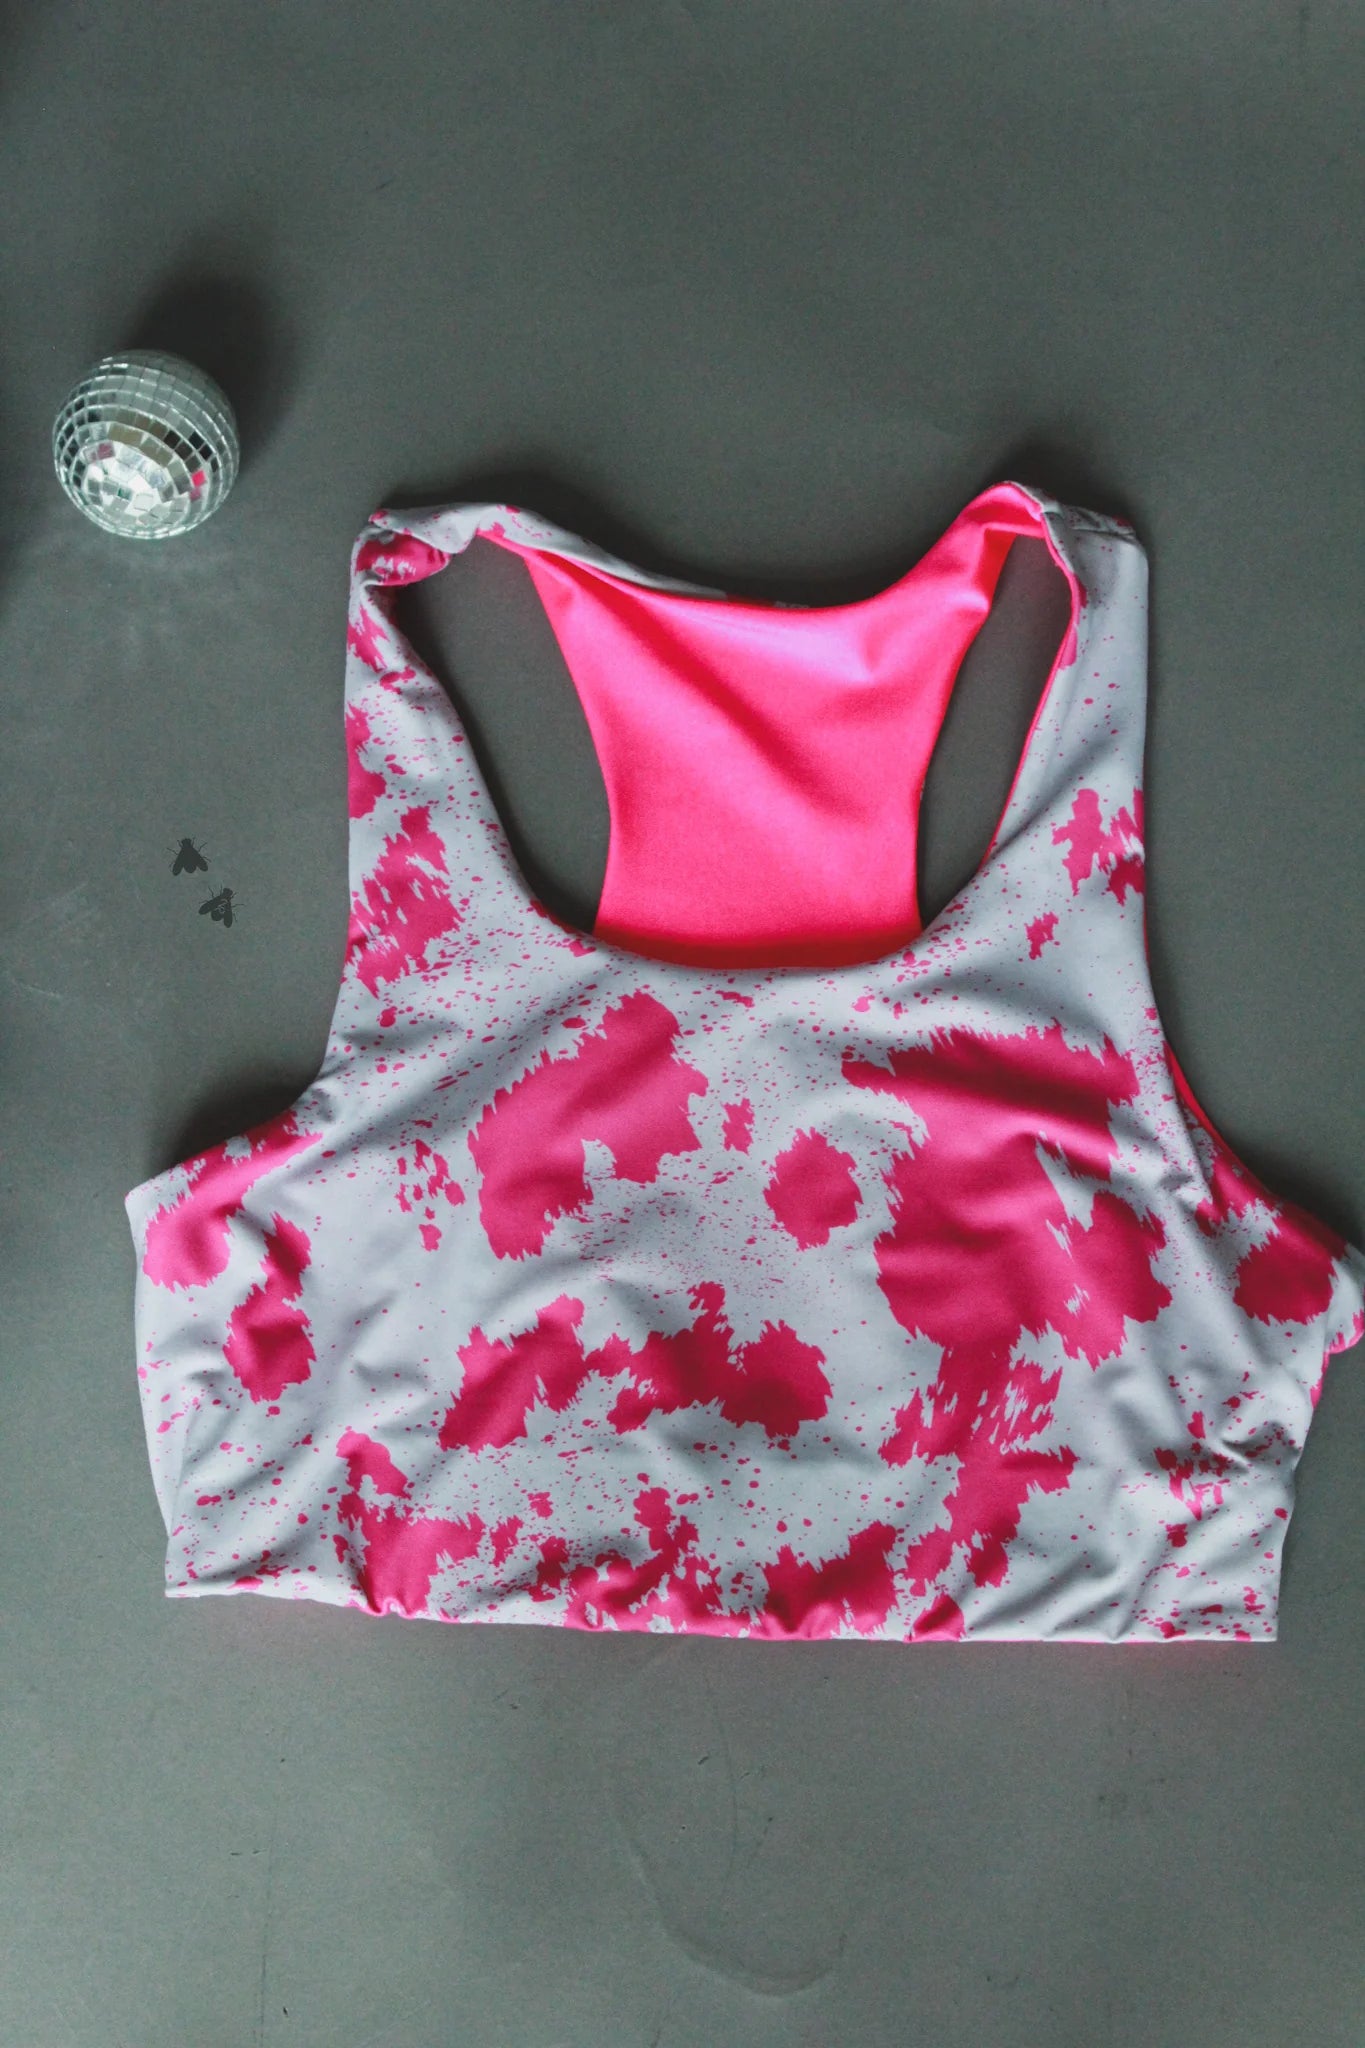 the Pretty in Pink |Swap| top